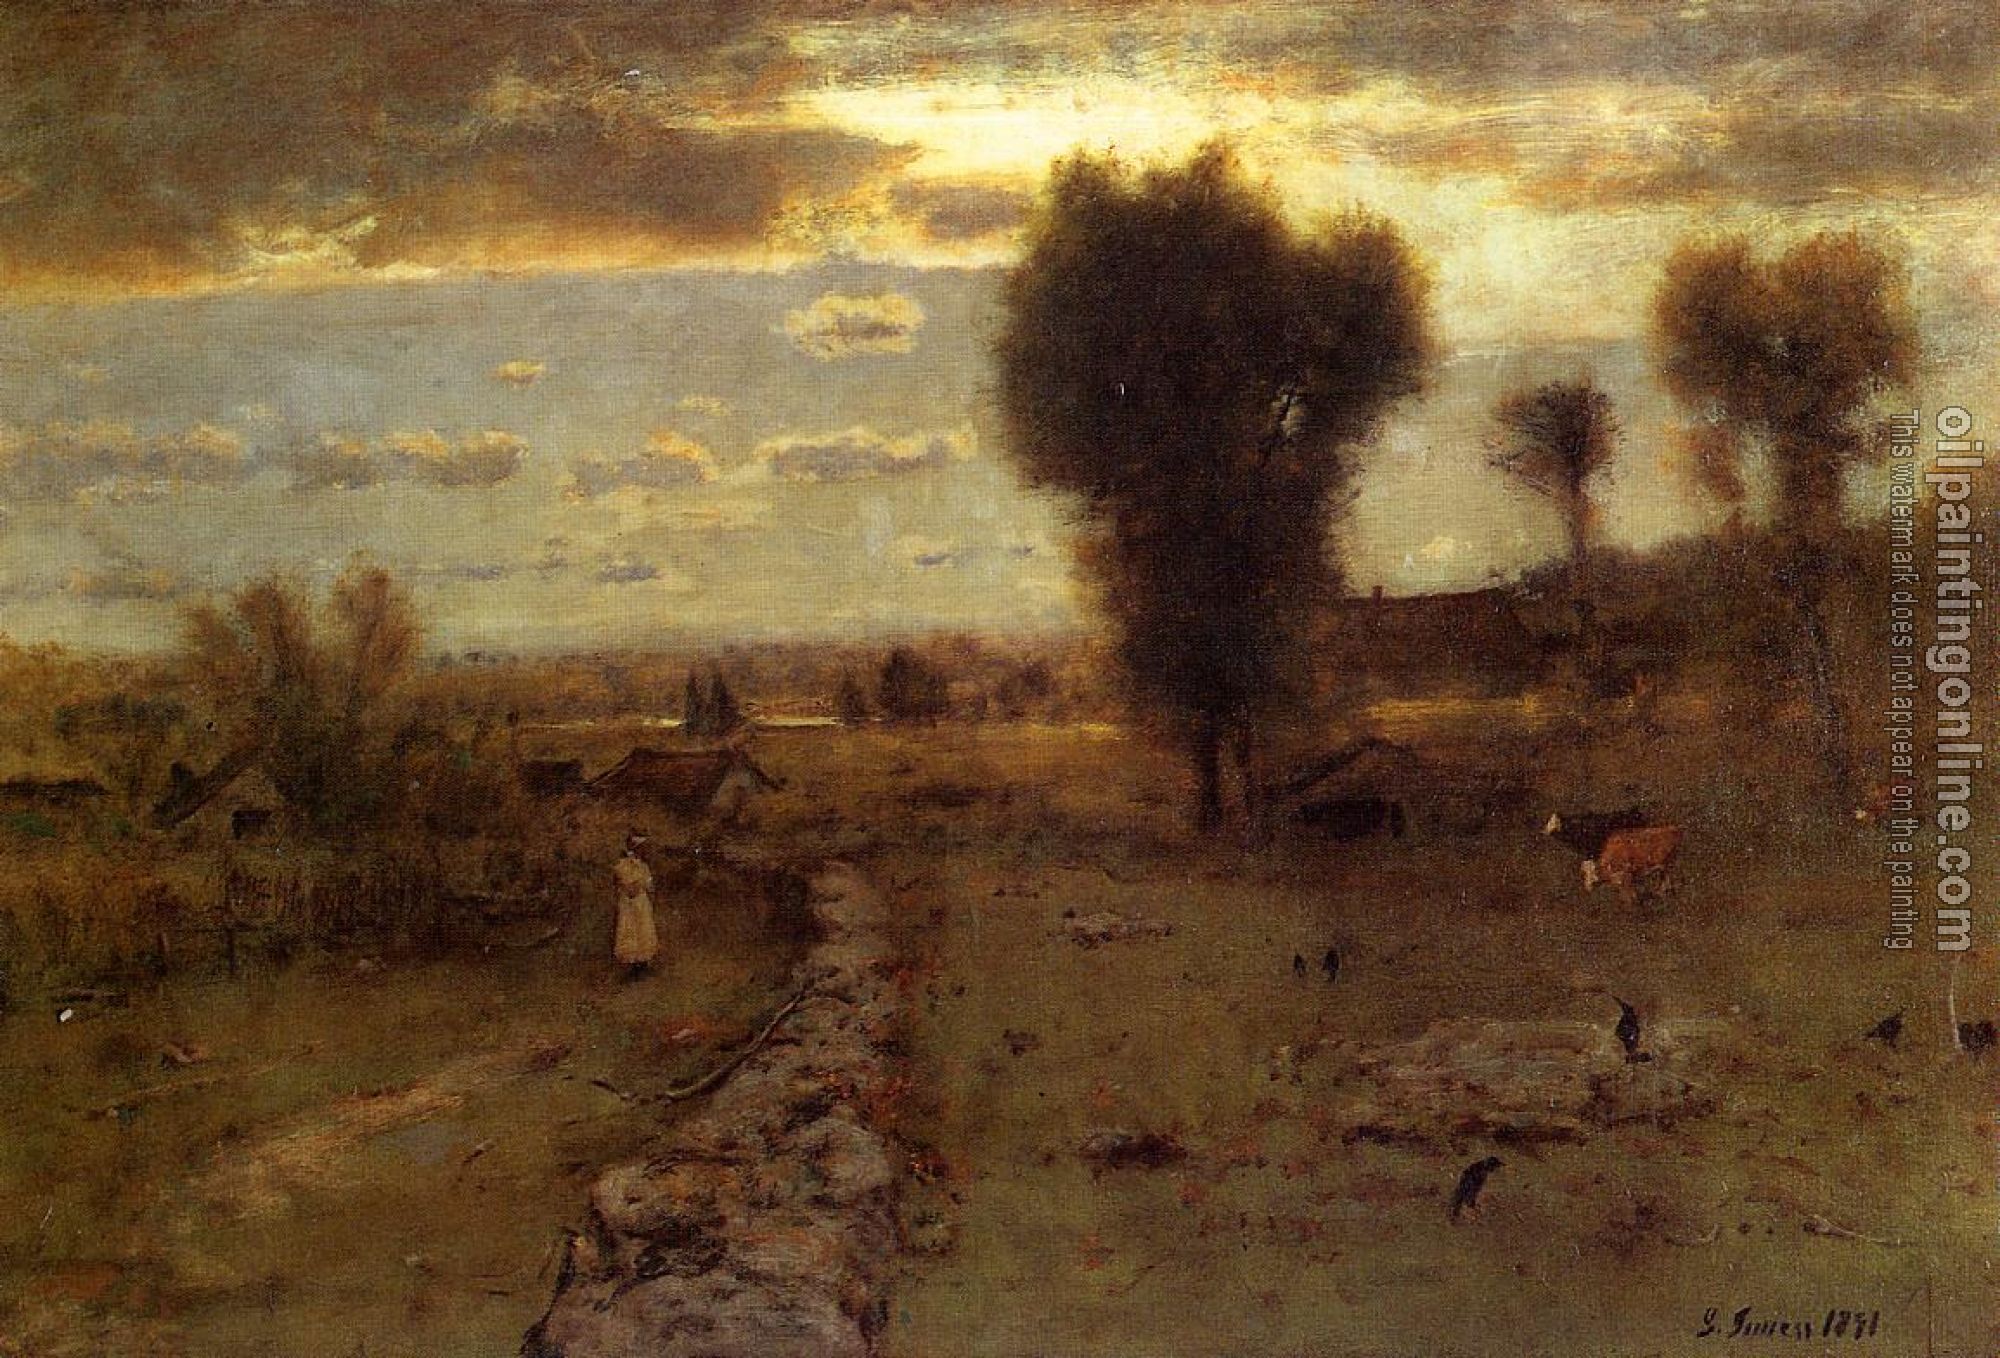 George Inness - The Clouded Sun